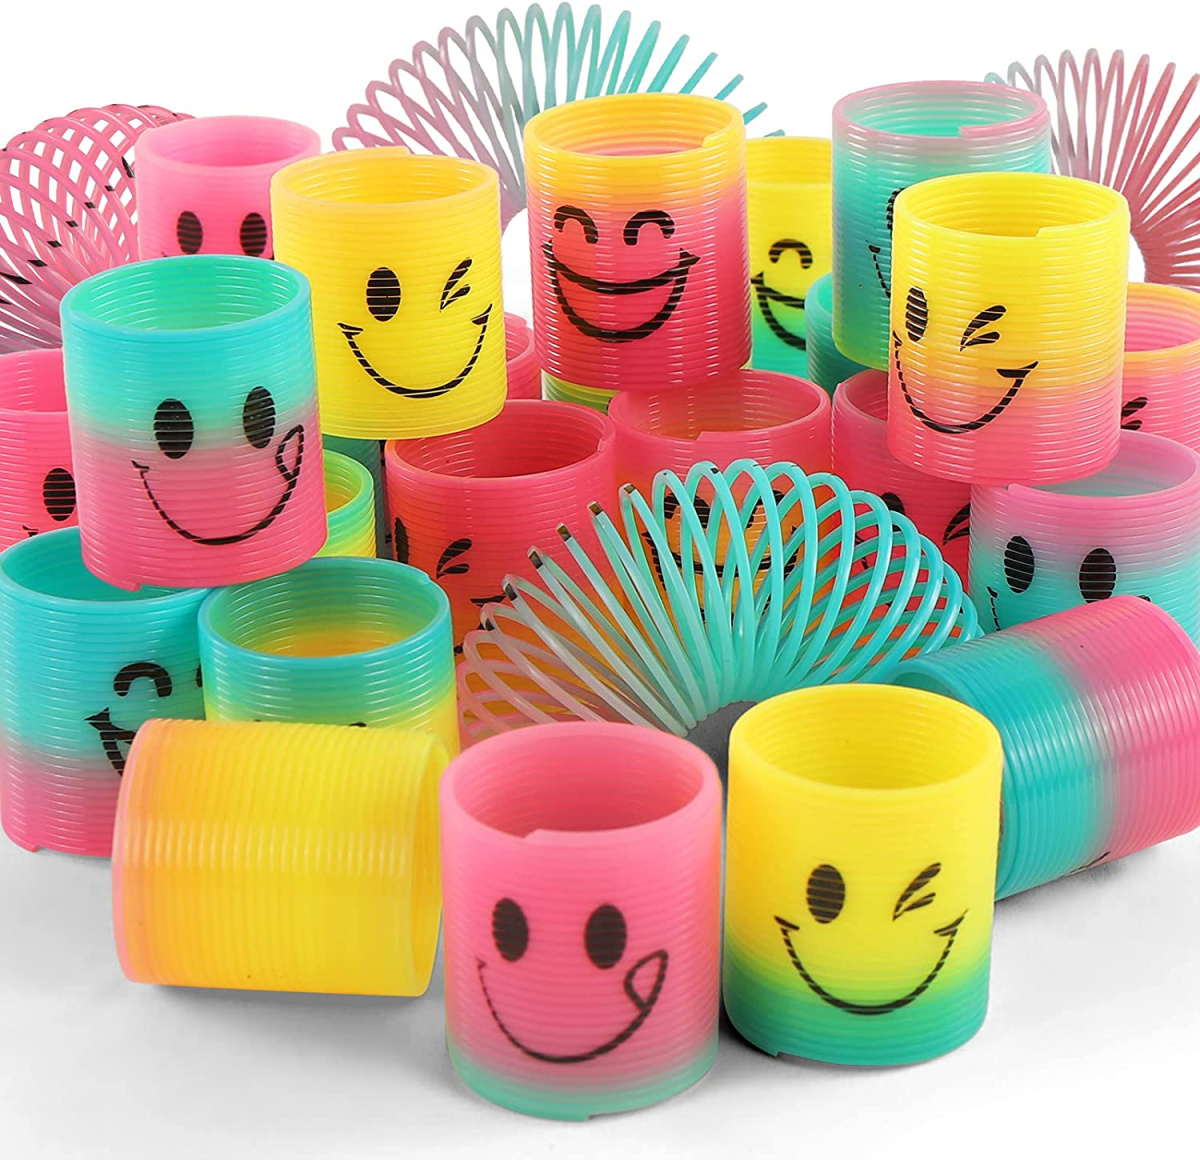 Mini slinky toys are non-candy easter basket stuffer